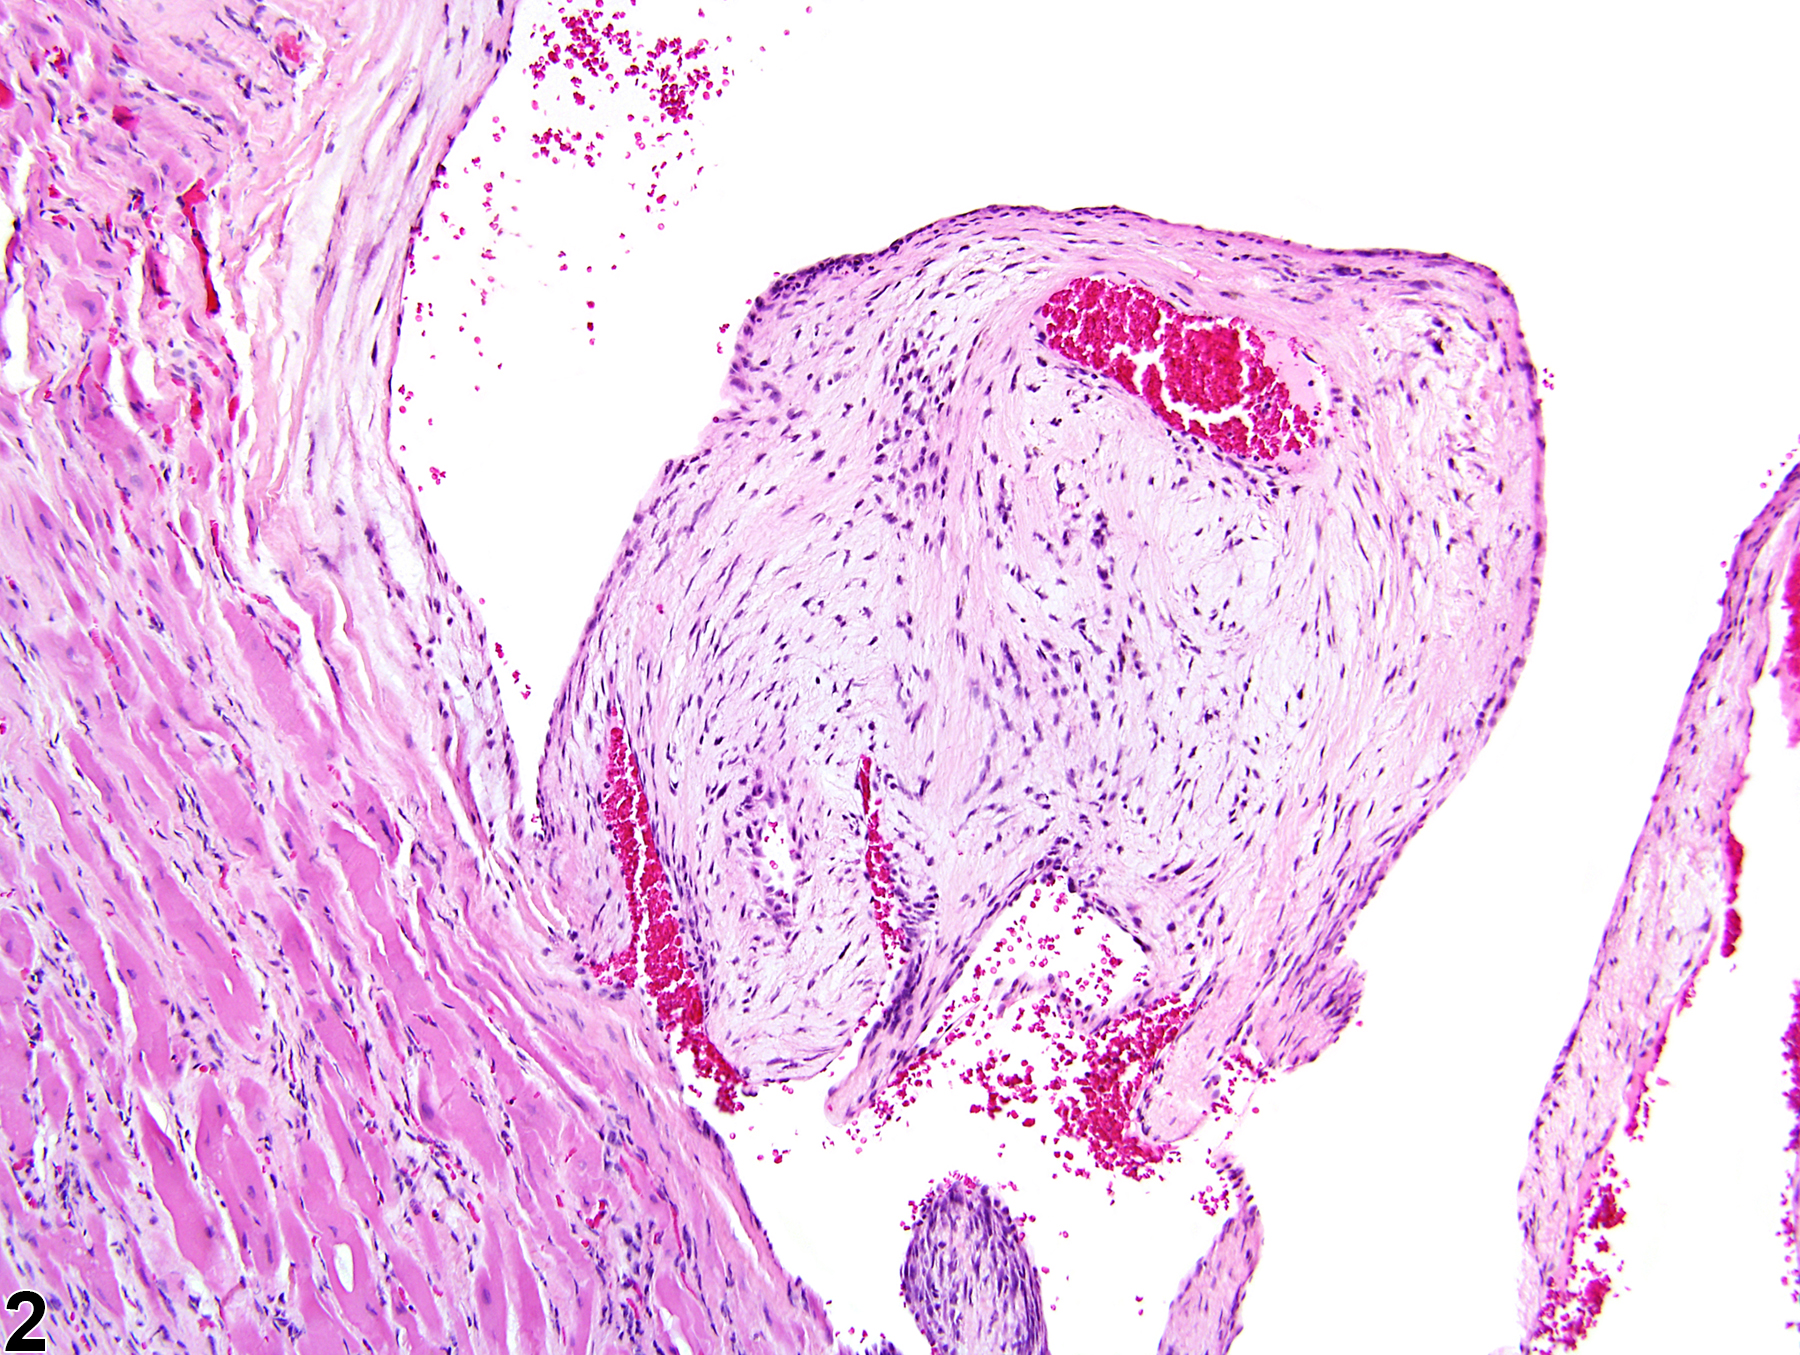 Image of degeneration, myxomatous in the heart, valve from a female F344/N rat in a chronic study